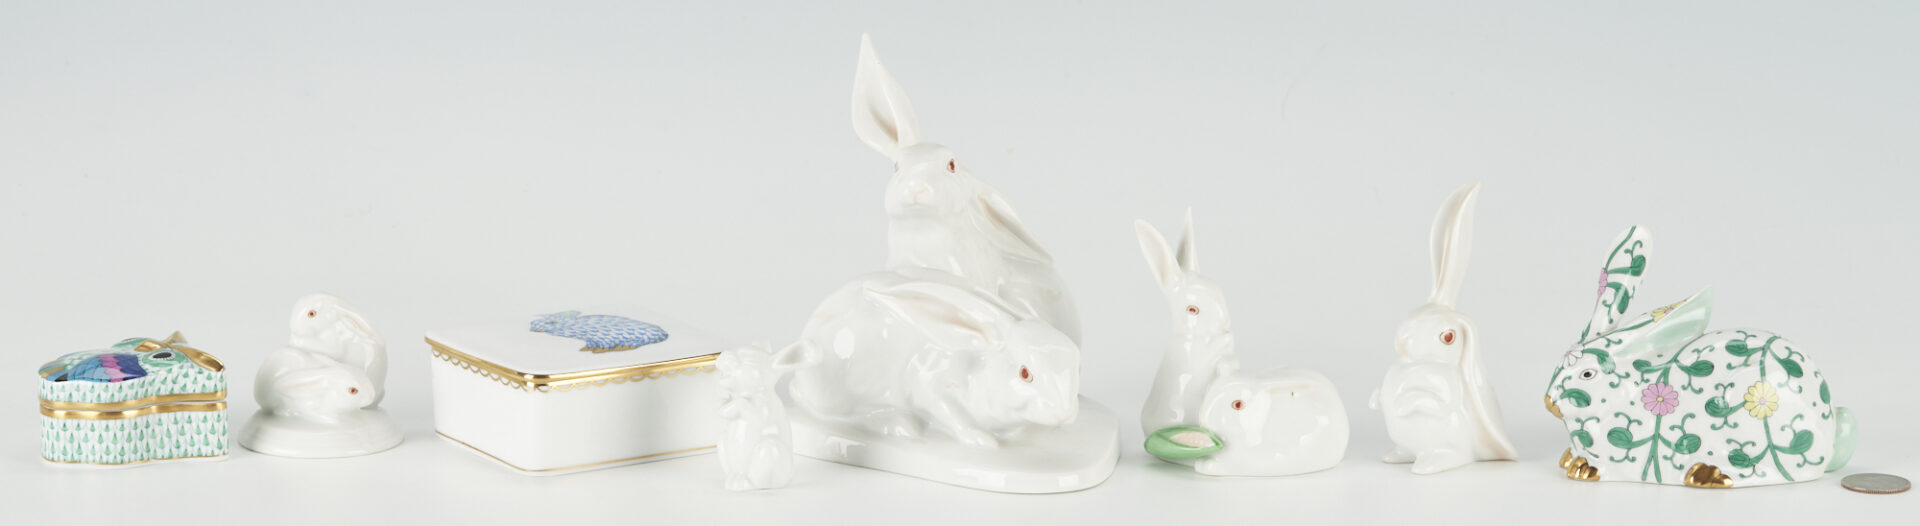 Lot 745: 7 Herend Porcelain Items & 1 Rosenthal, incl. Rabbit Figurines, Boxes